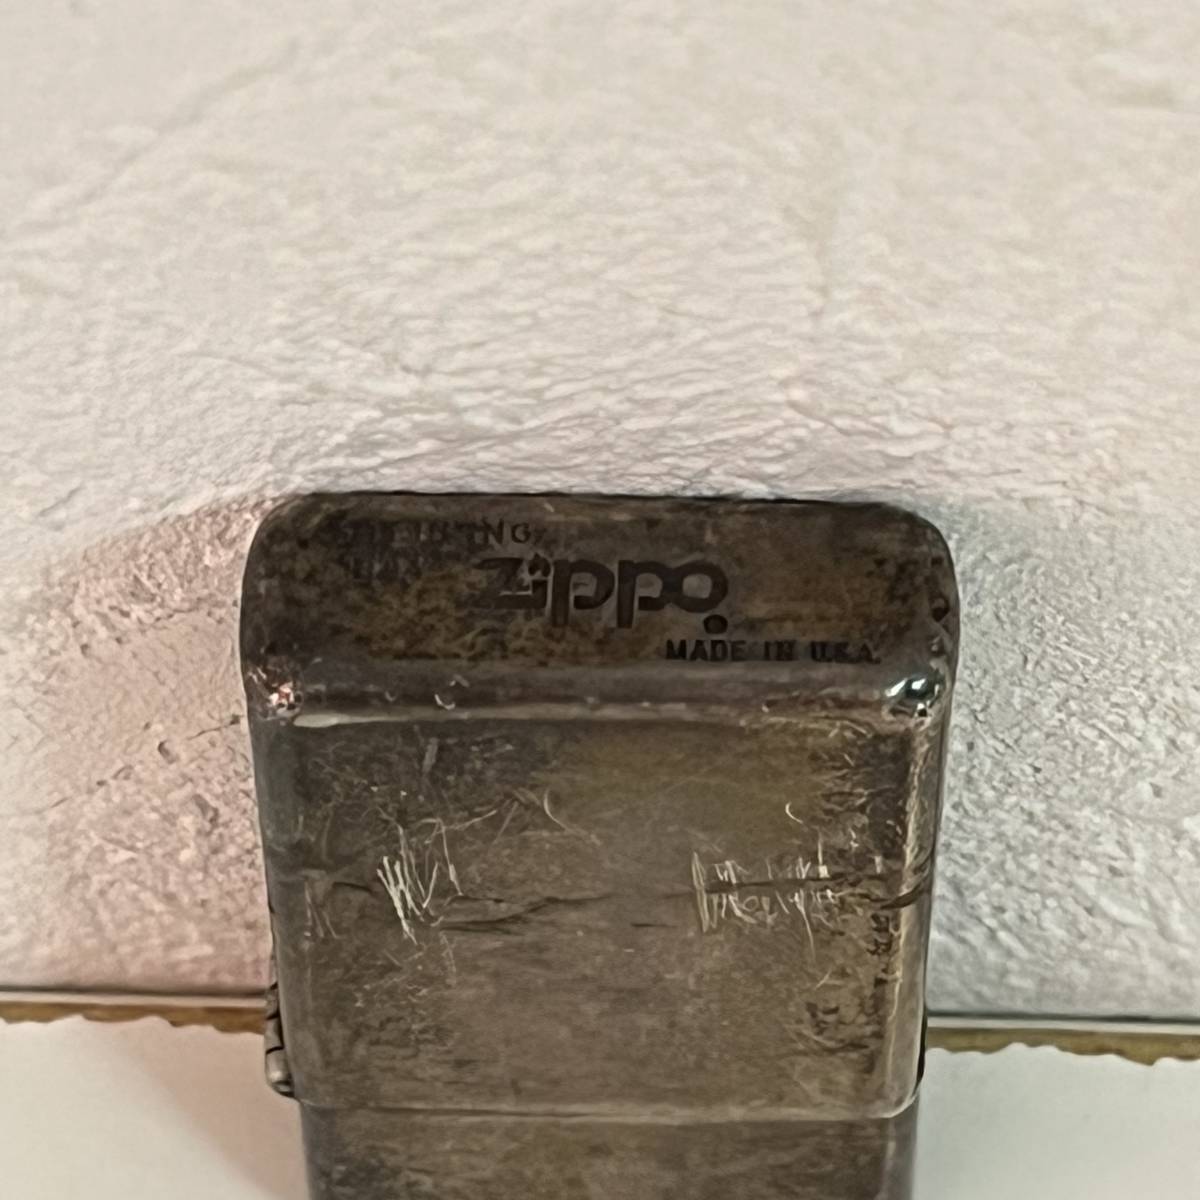 ZIPPO ジッポー　STERLING 1994 MADE IN U.S.A【コレクション】ヴィンテージ レトロ 【 人気アイテム 】